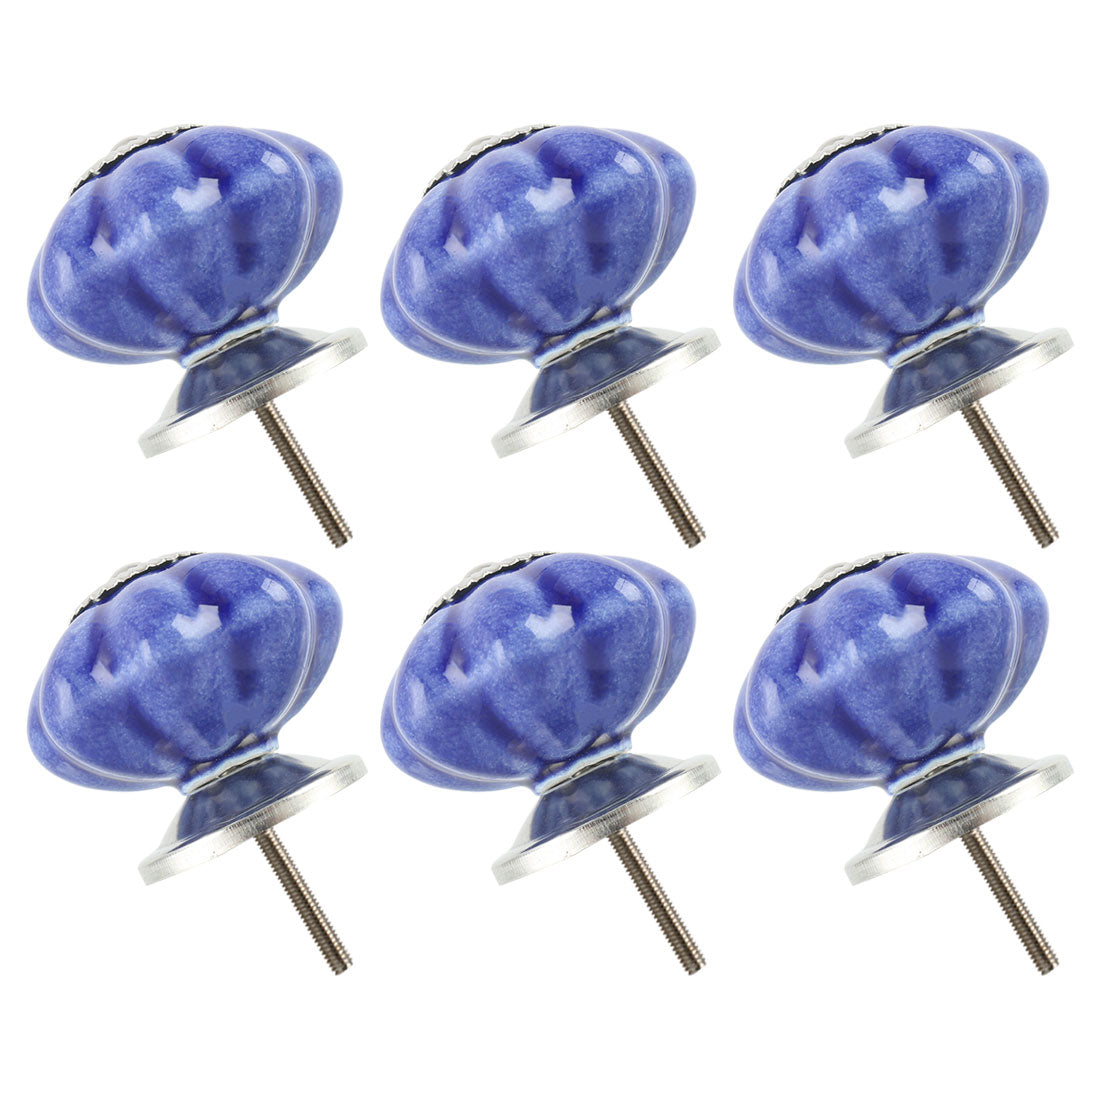 uxcell Uxcell Ceramic Knob Hand Painted Drawer Handle Cabinet Accessory 41mm, Indigo Blue 6pcs